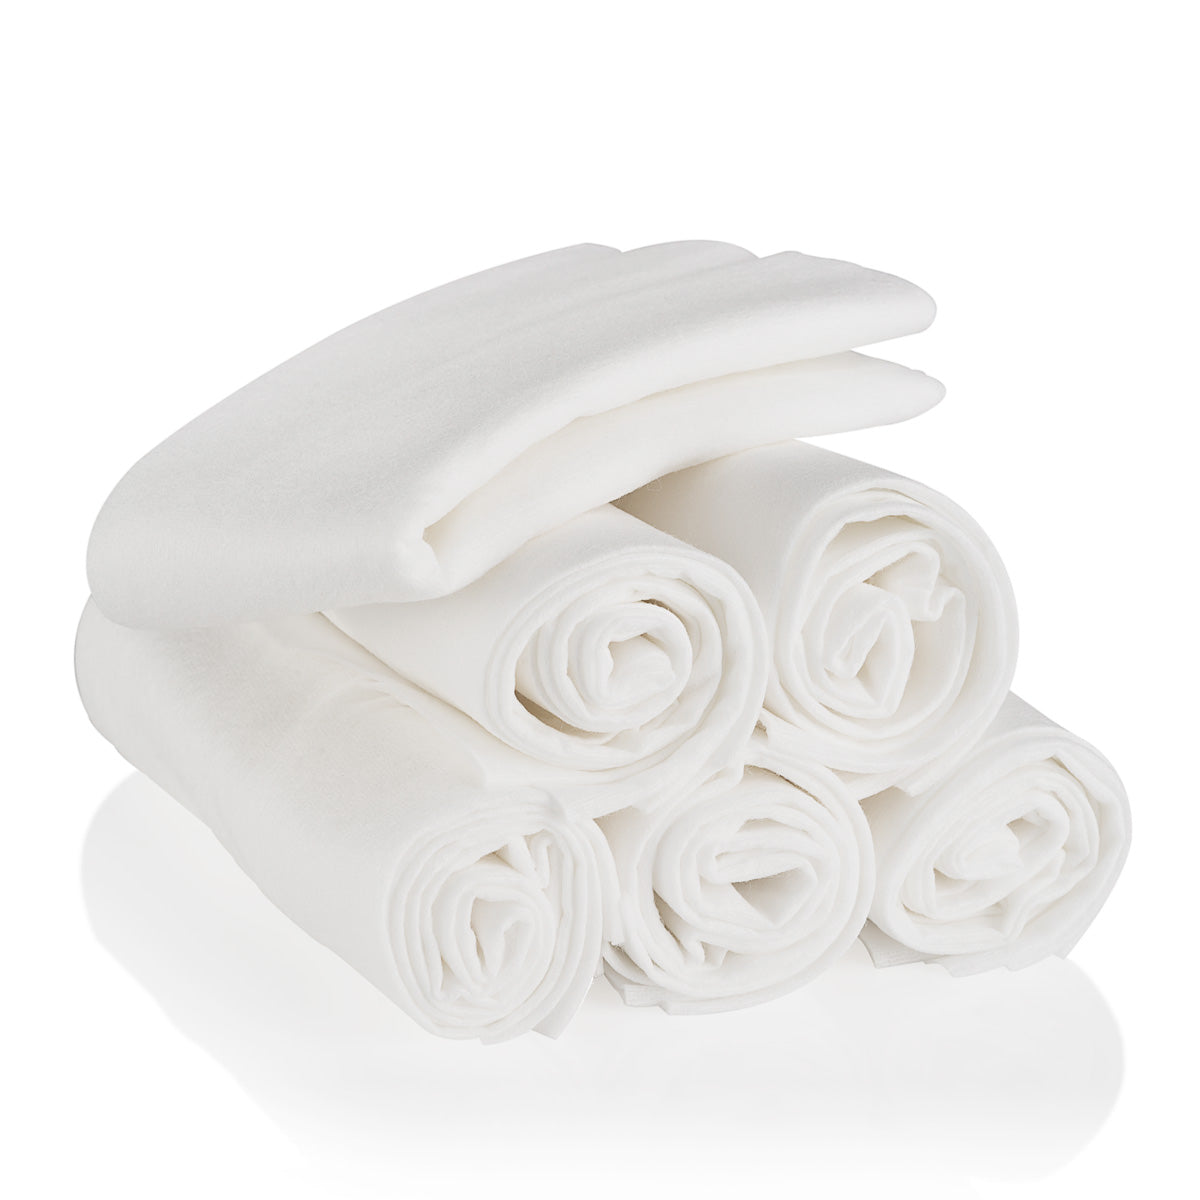 Natural Cleansing Cloths -100% Natural fibres, Bio-degradable, Recyclable